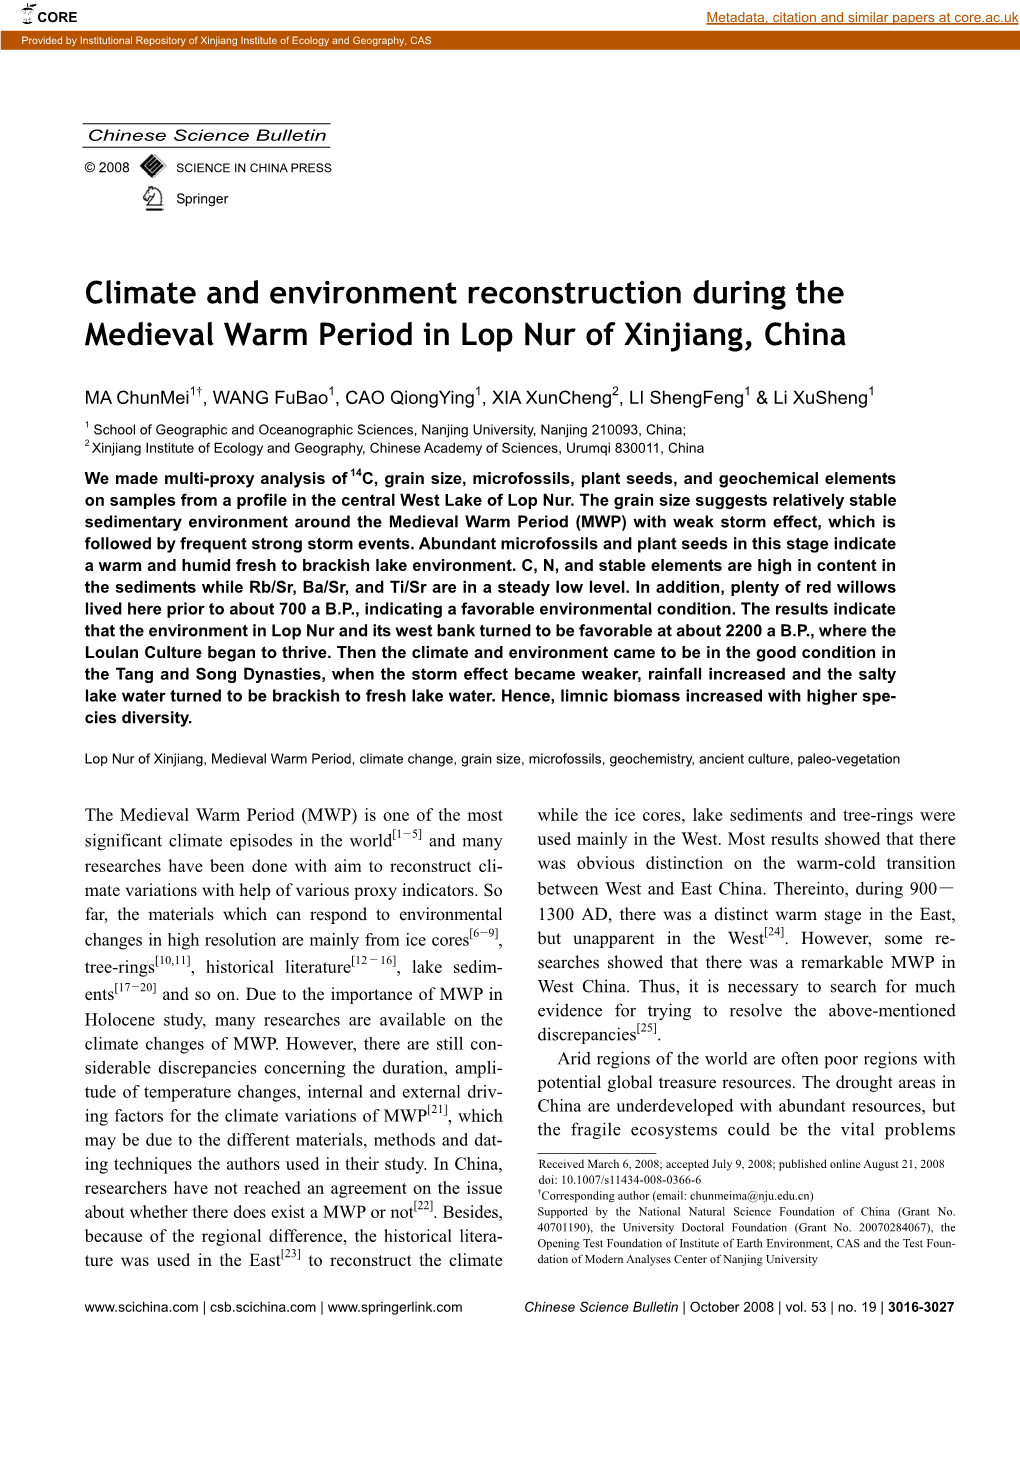 Climate and Environment Reconstruction During the Medieval Warm Period in Lop Nur of Xinjiang, China